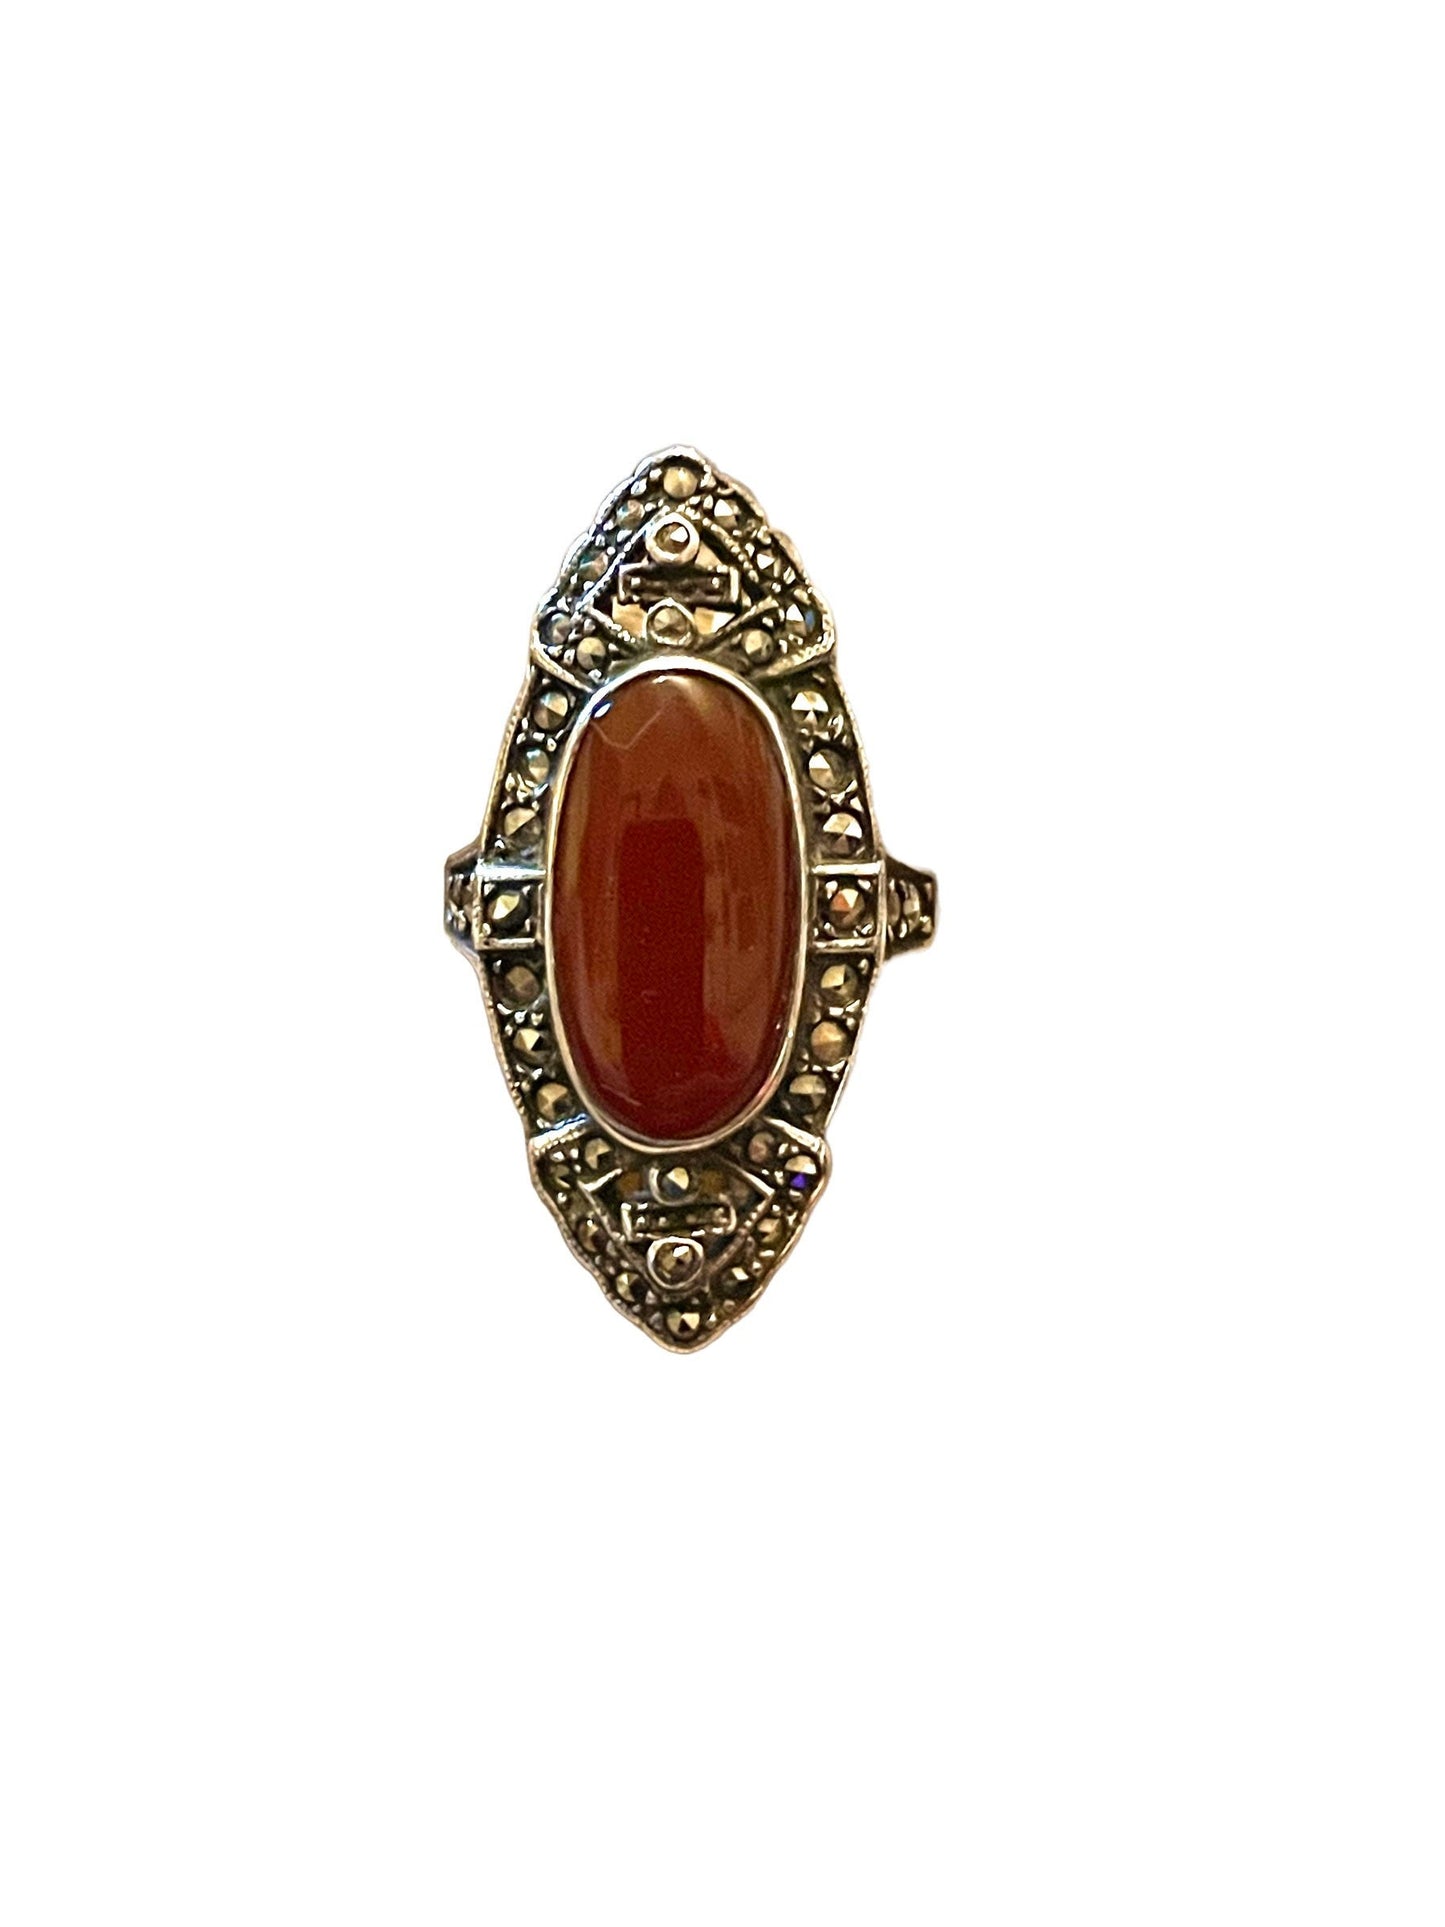 Carnelian & Marcasite Art Deco Sterling Silver and Marcasite Ring